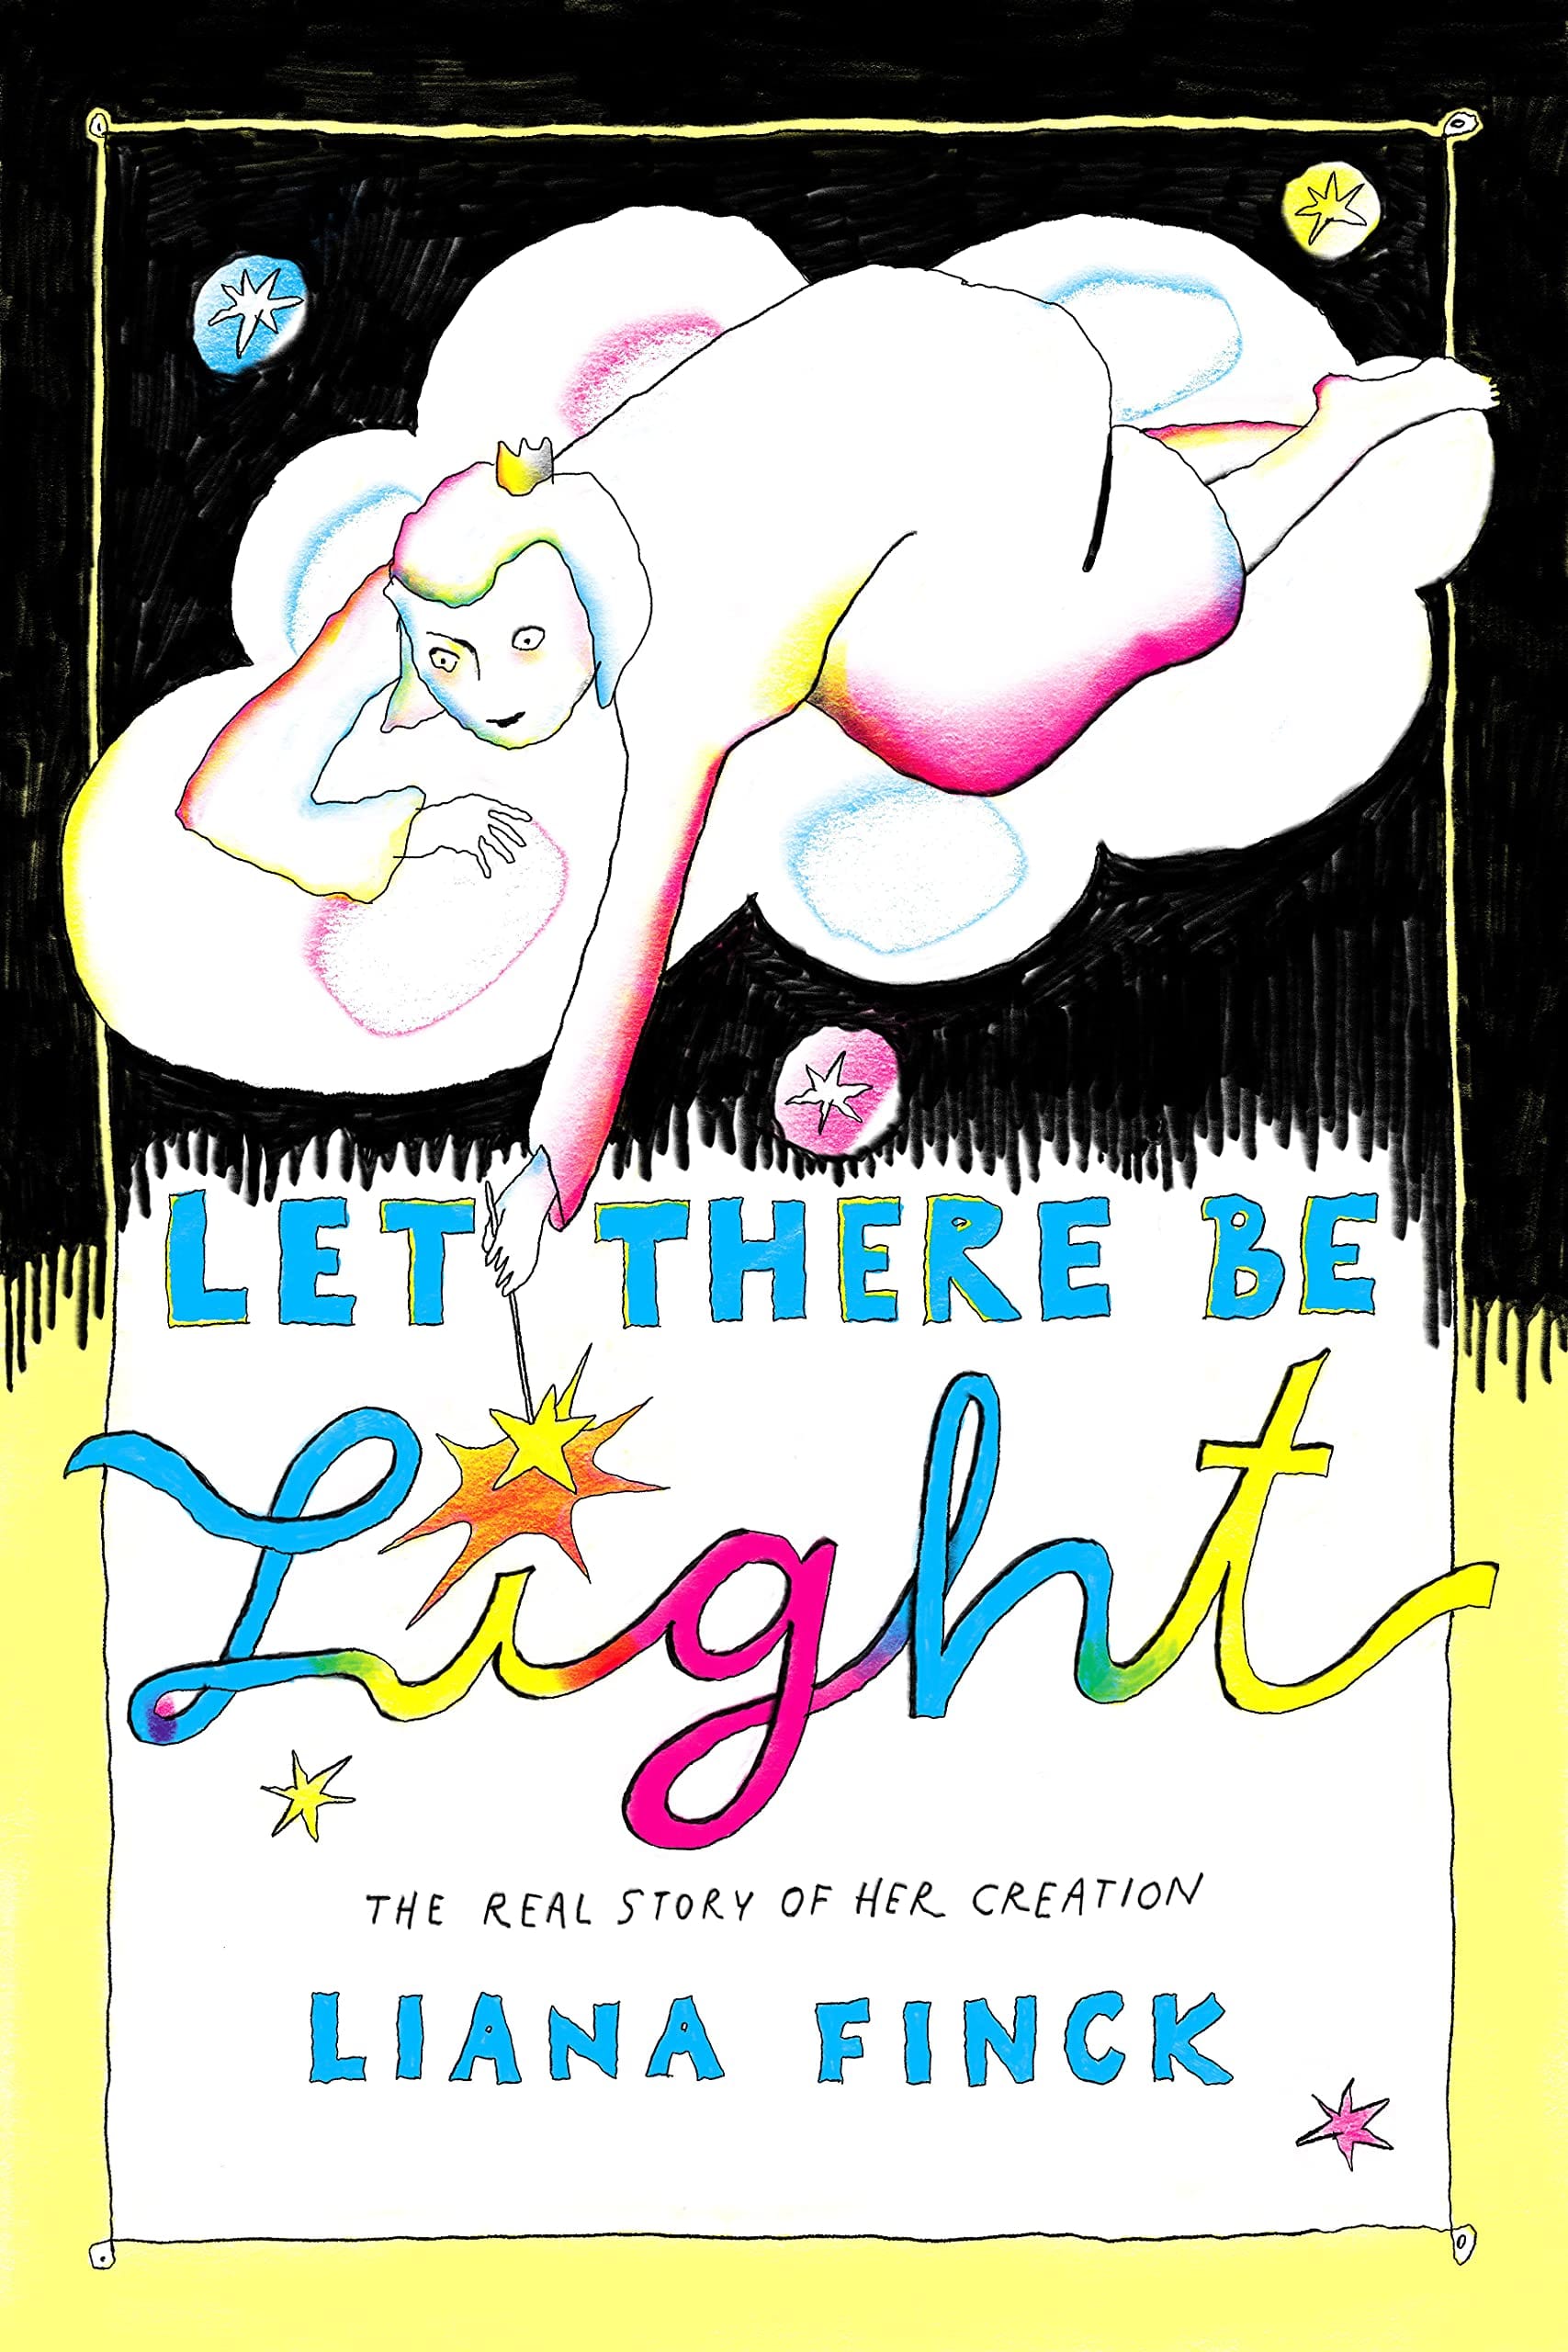 Let There Be Light: The Real Story of Her Creation